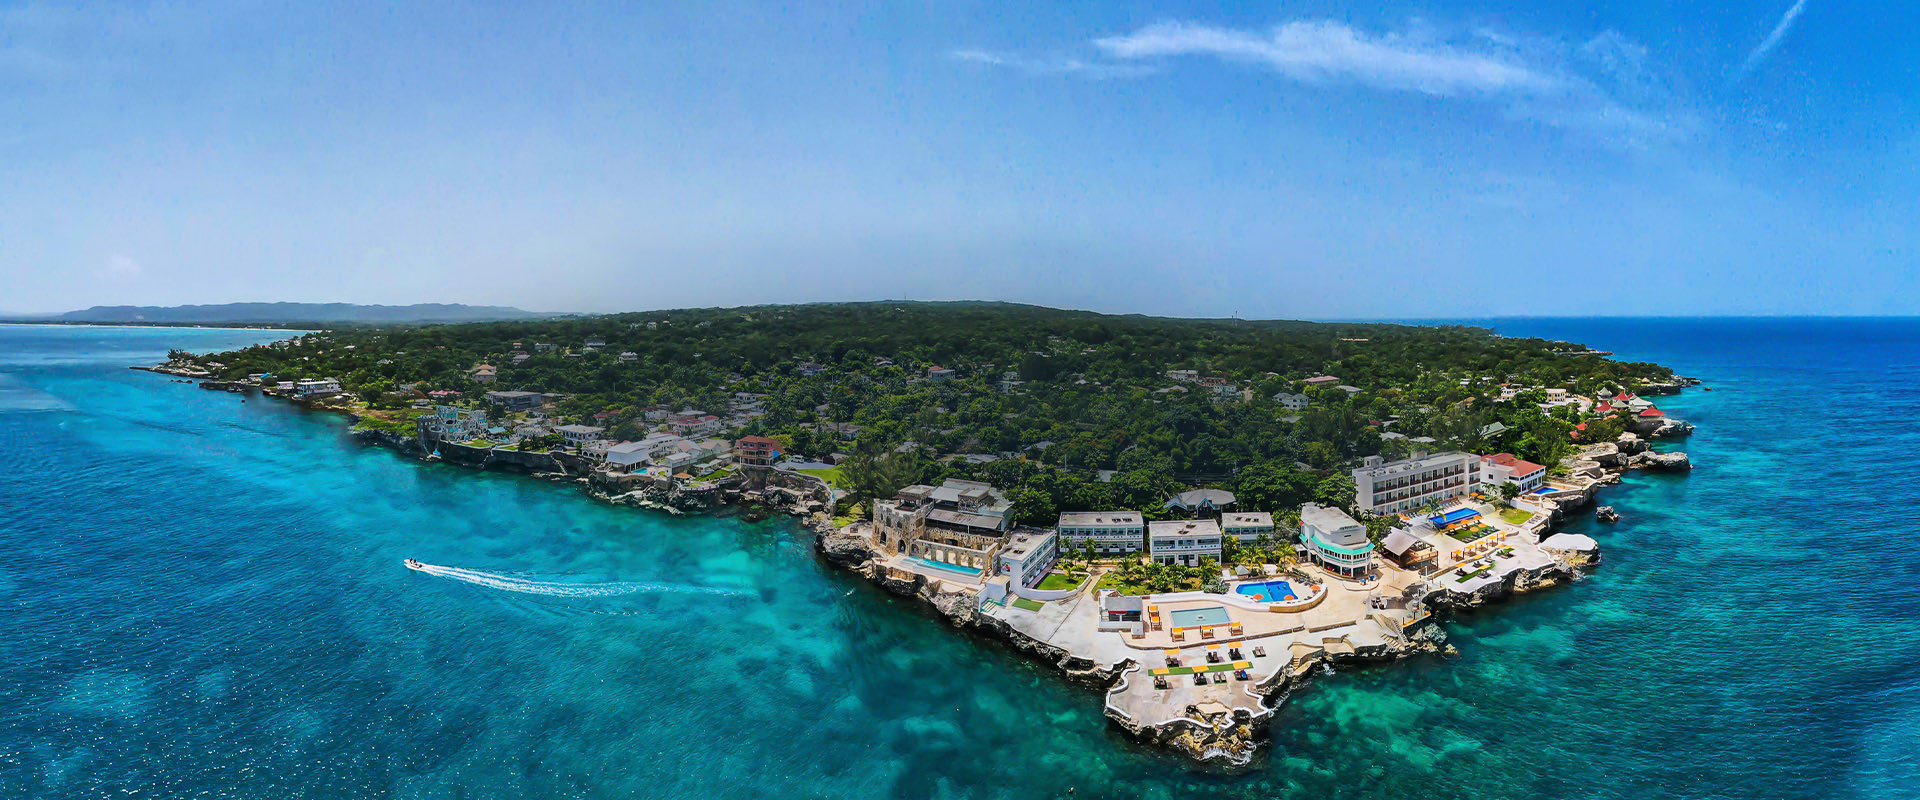 aerial view of resort building with lush tropical trees behind it, view of shape of coast with deep turquoise water